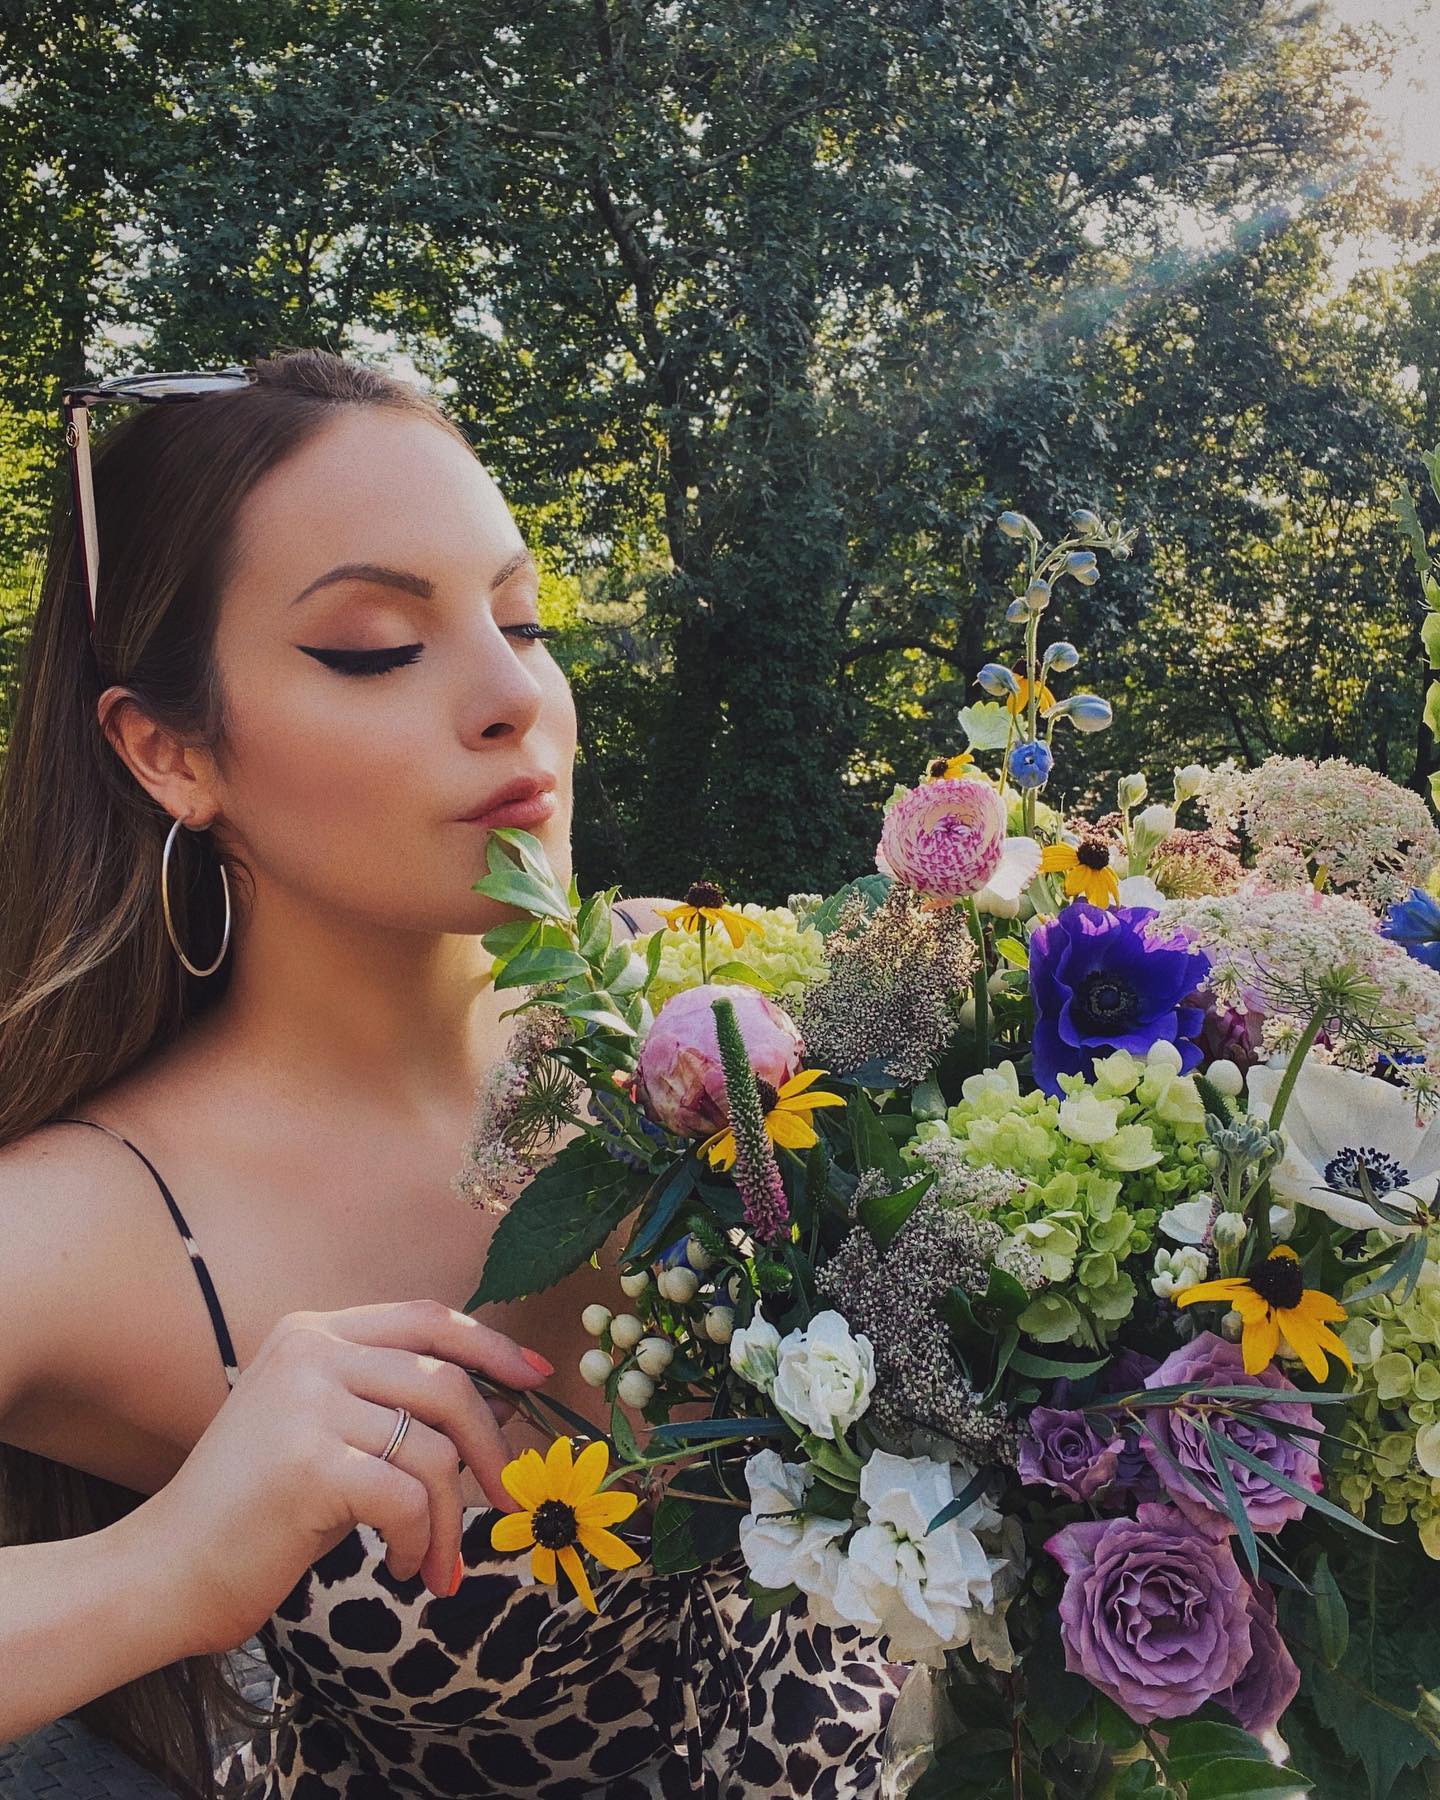 Stop And Smell Elizabeth Gillies’ Flowers! - Photo 1